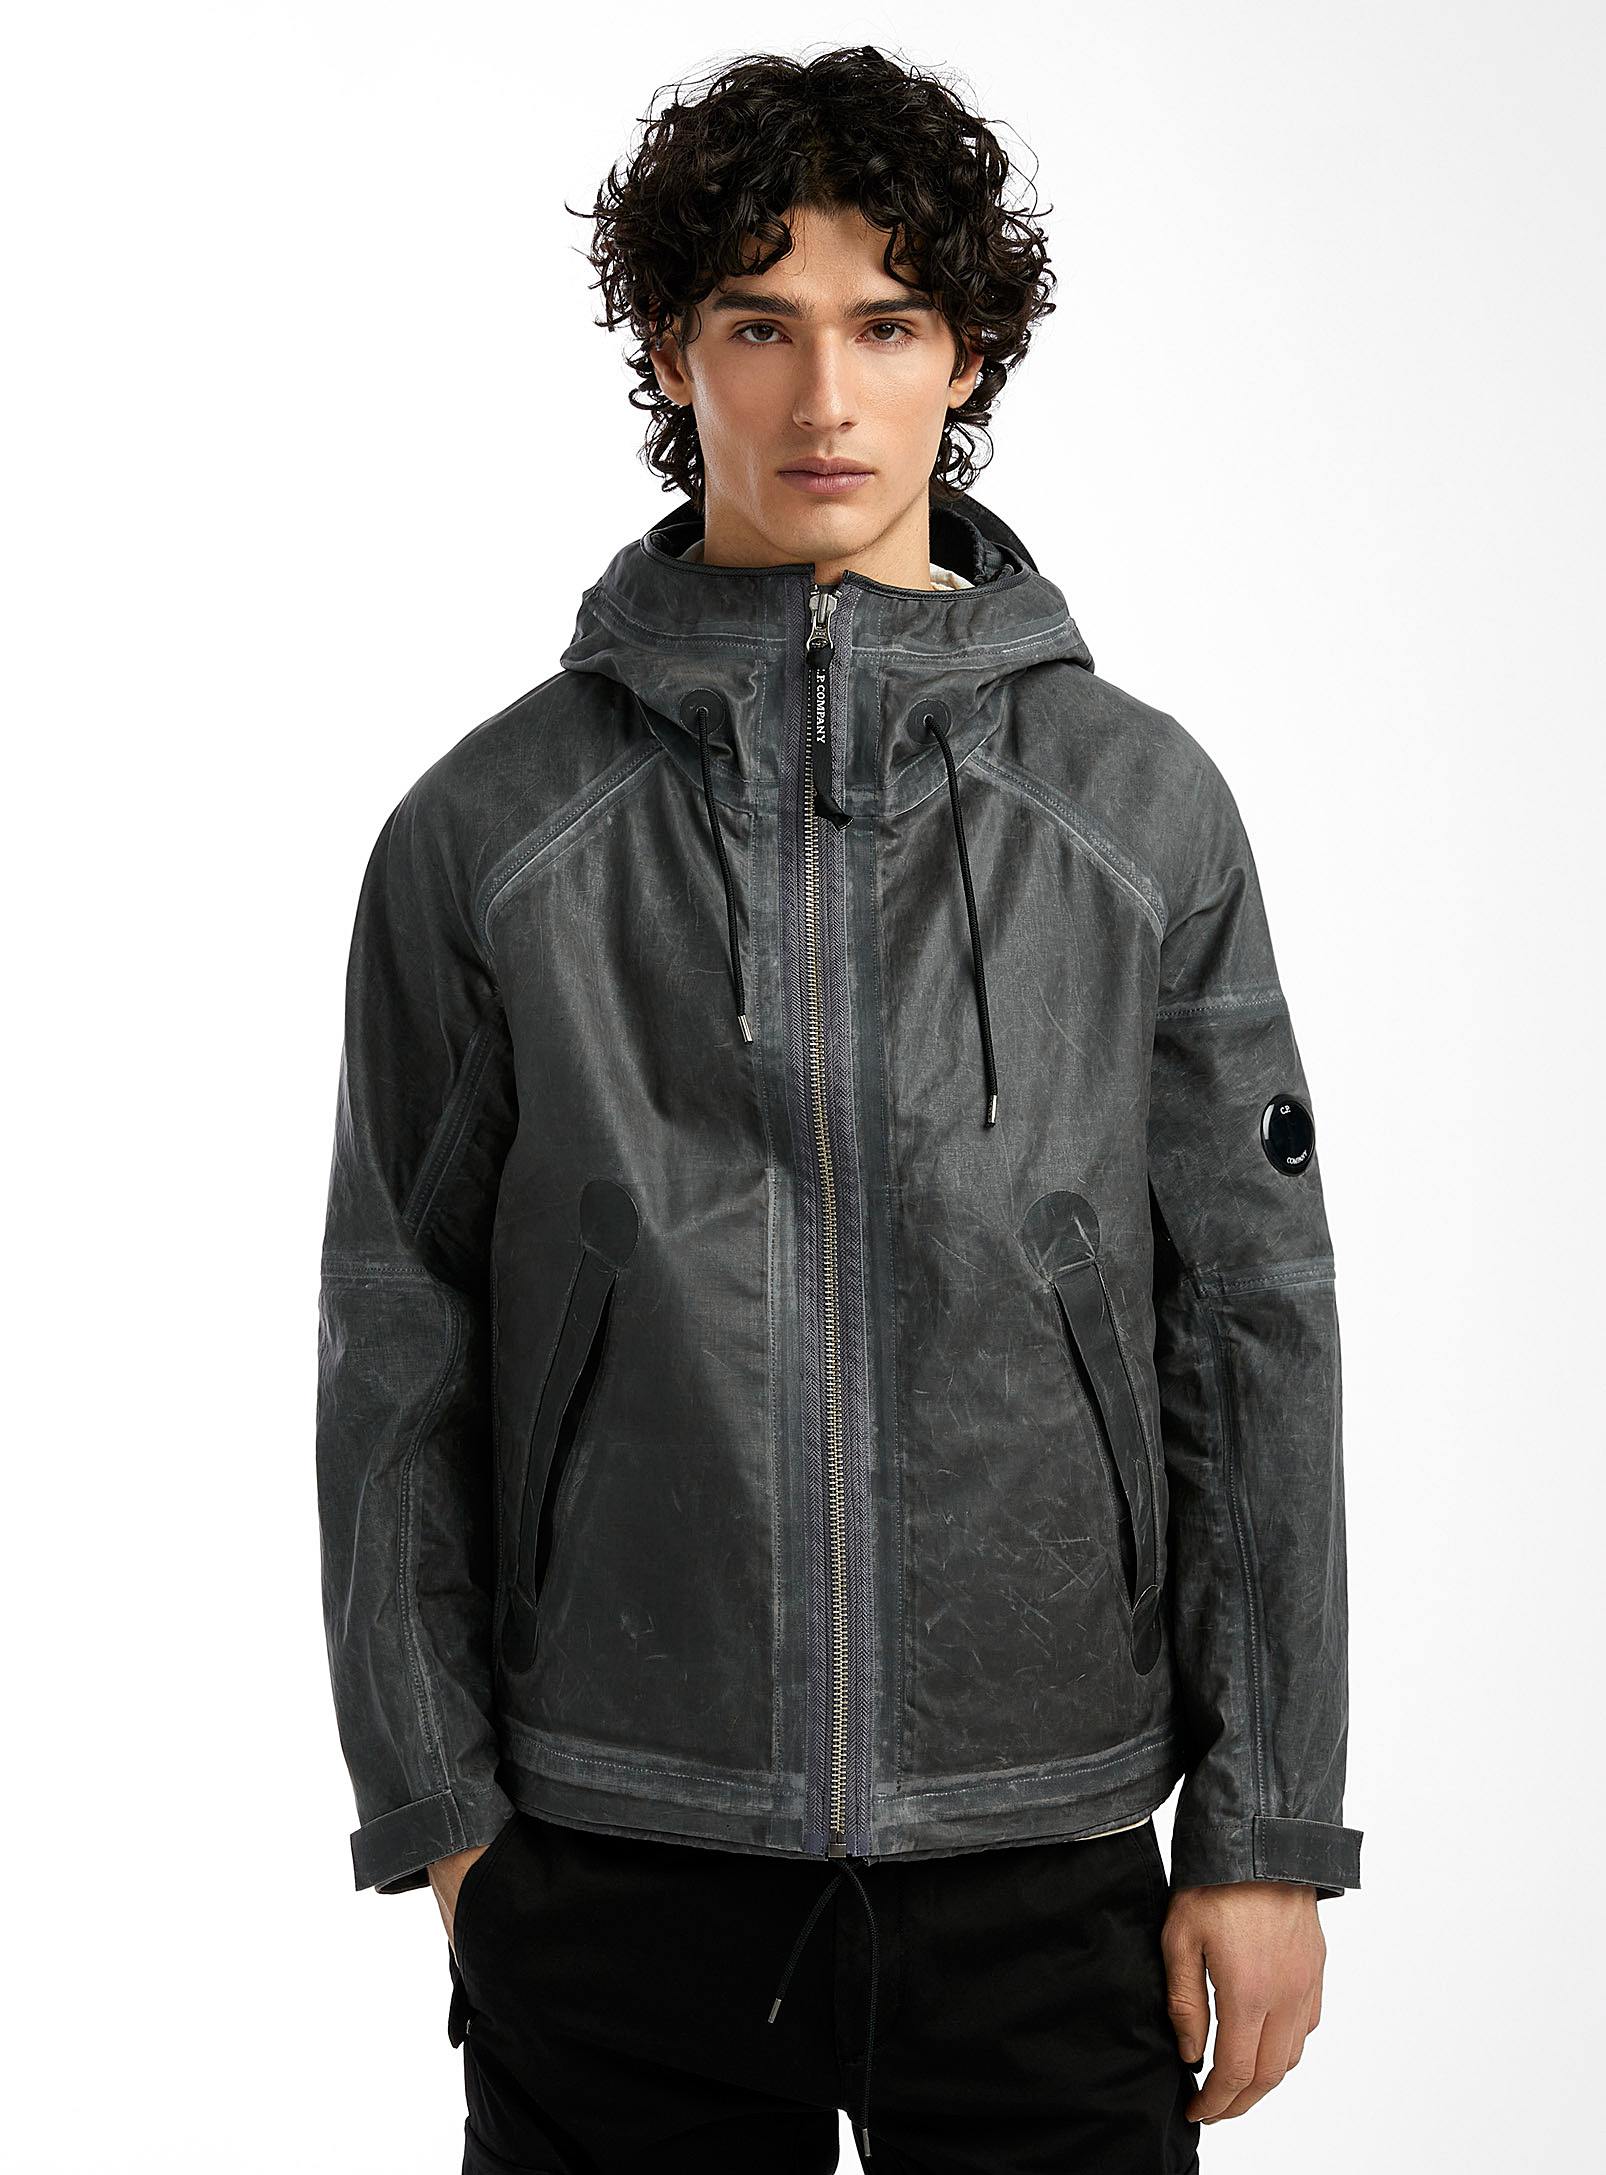 C.P. Company - Men's TOOB-Two hooded jacket